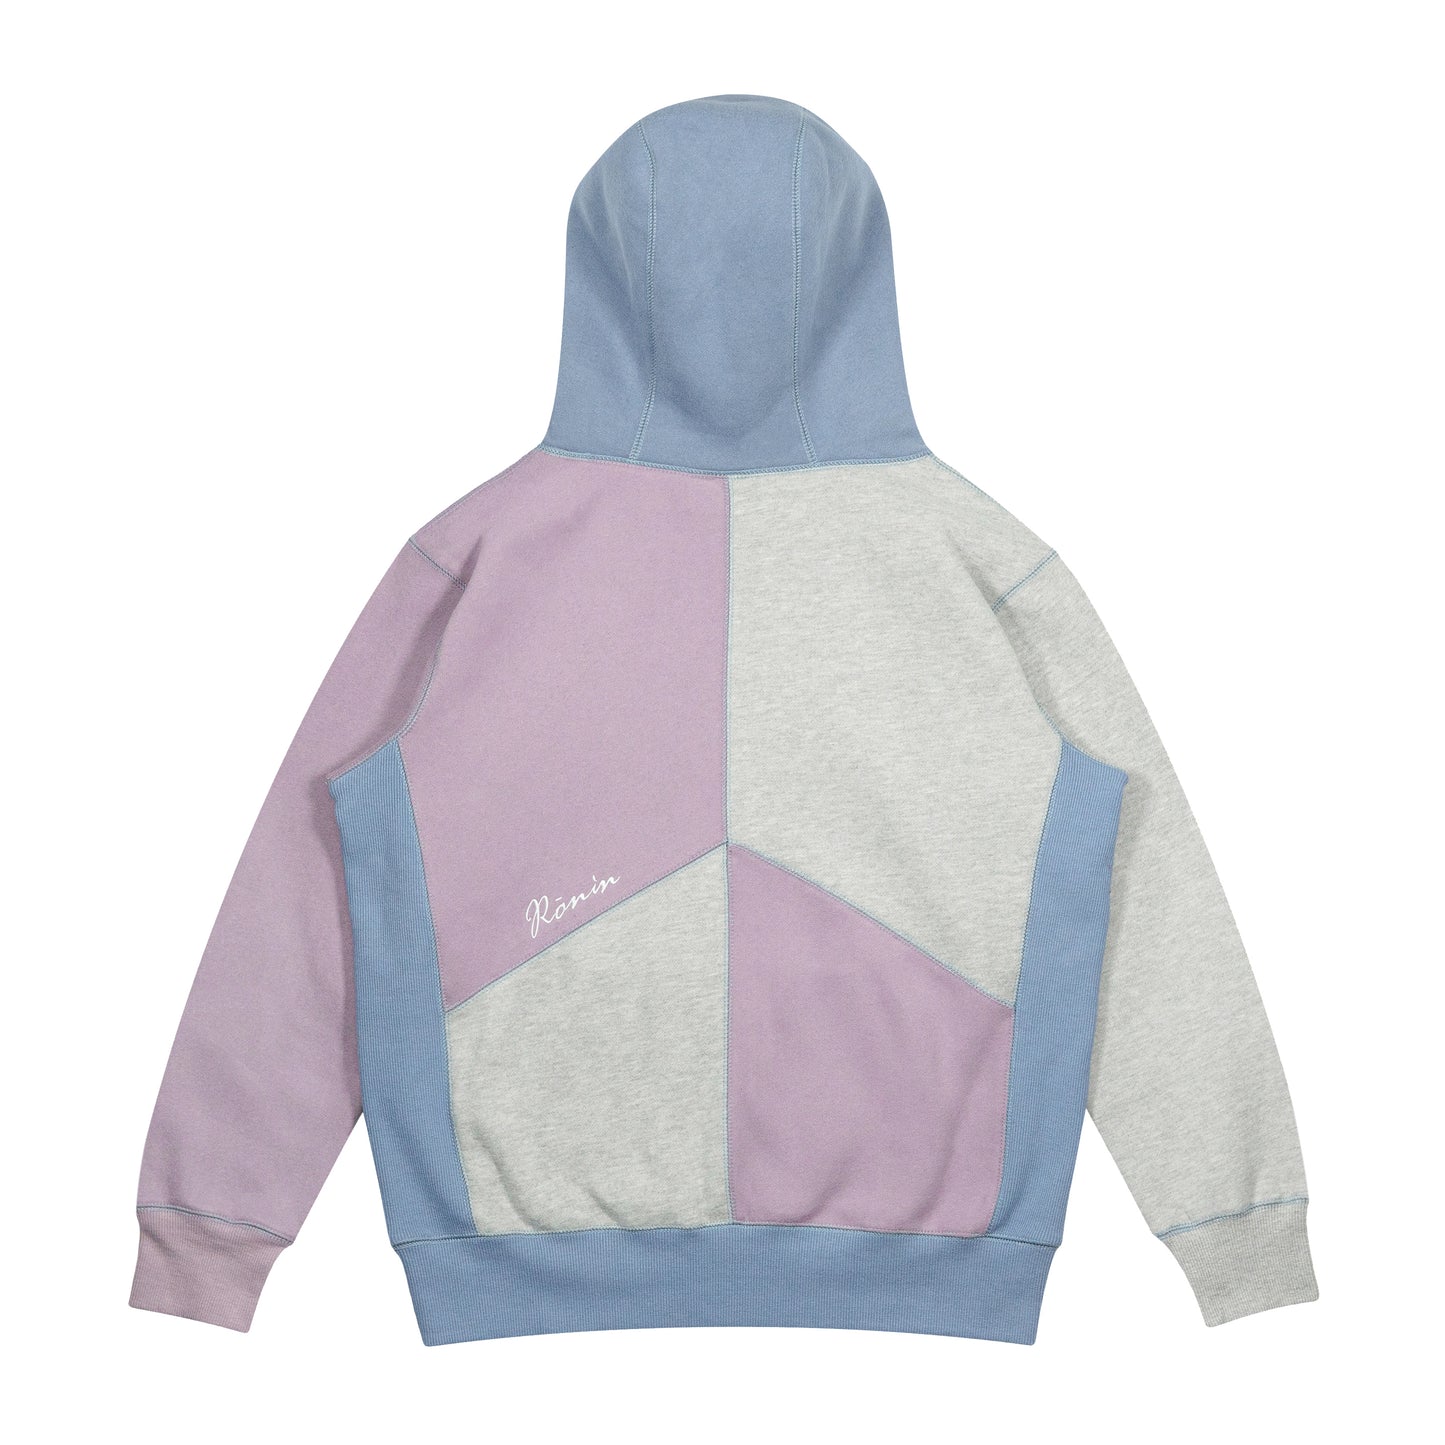 Increase the Peace Hoodie - Light Blue